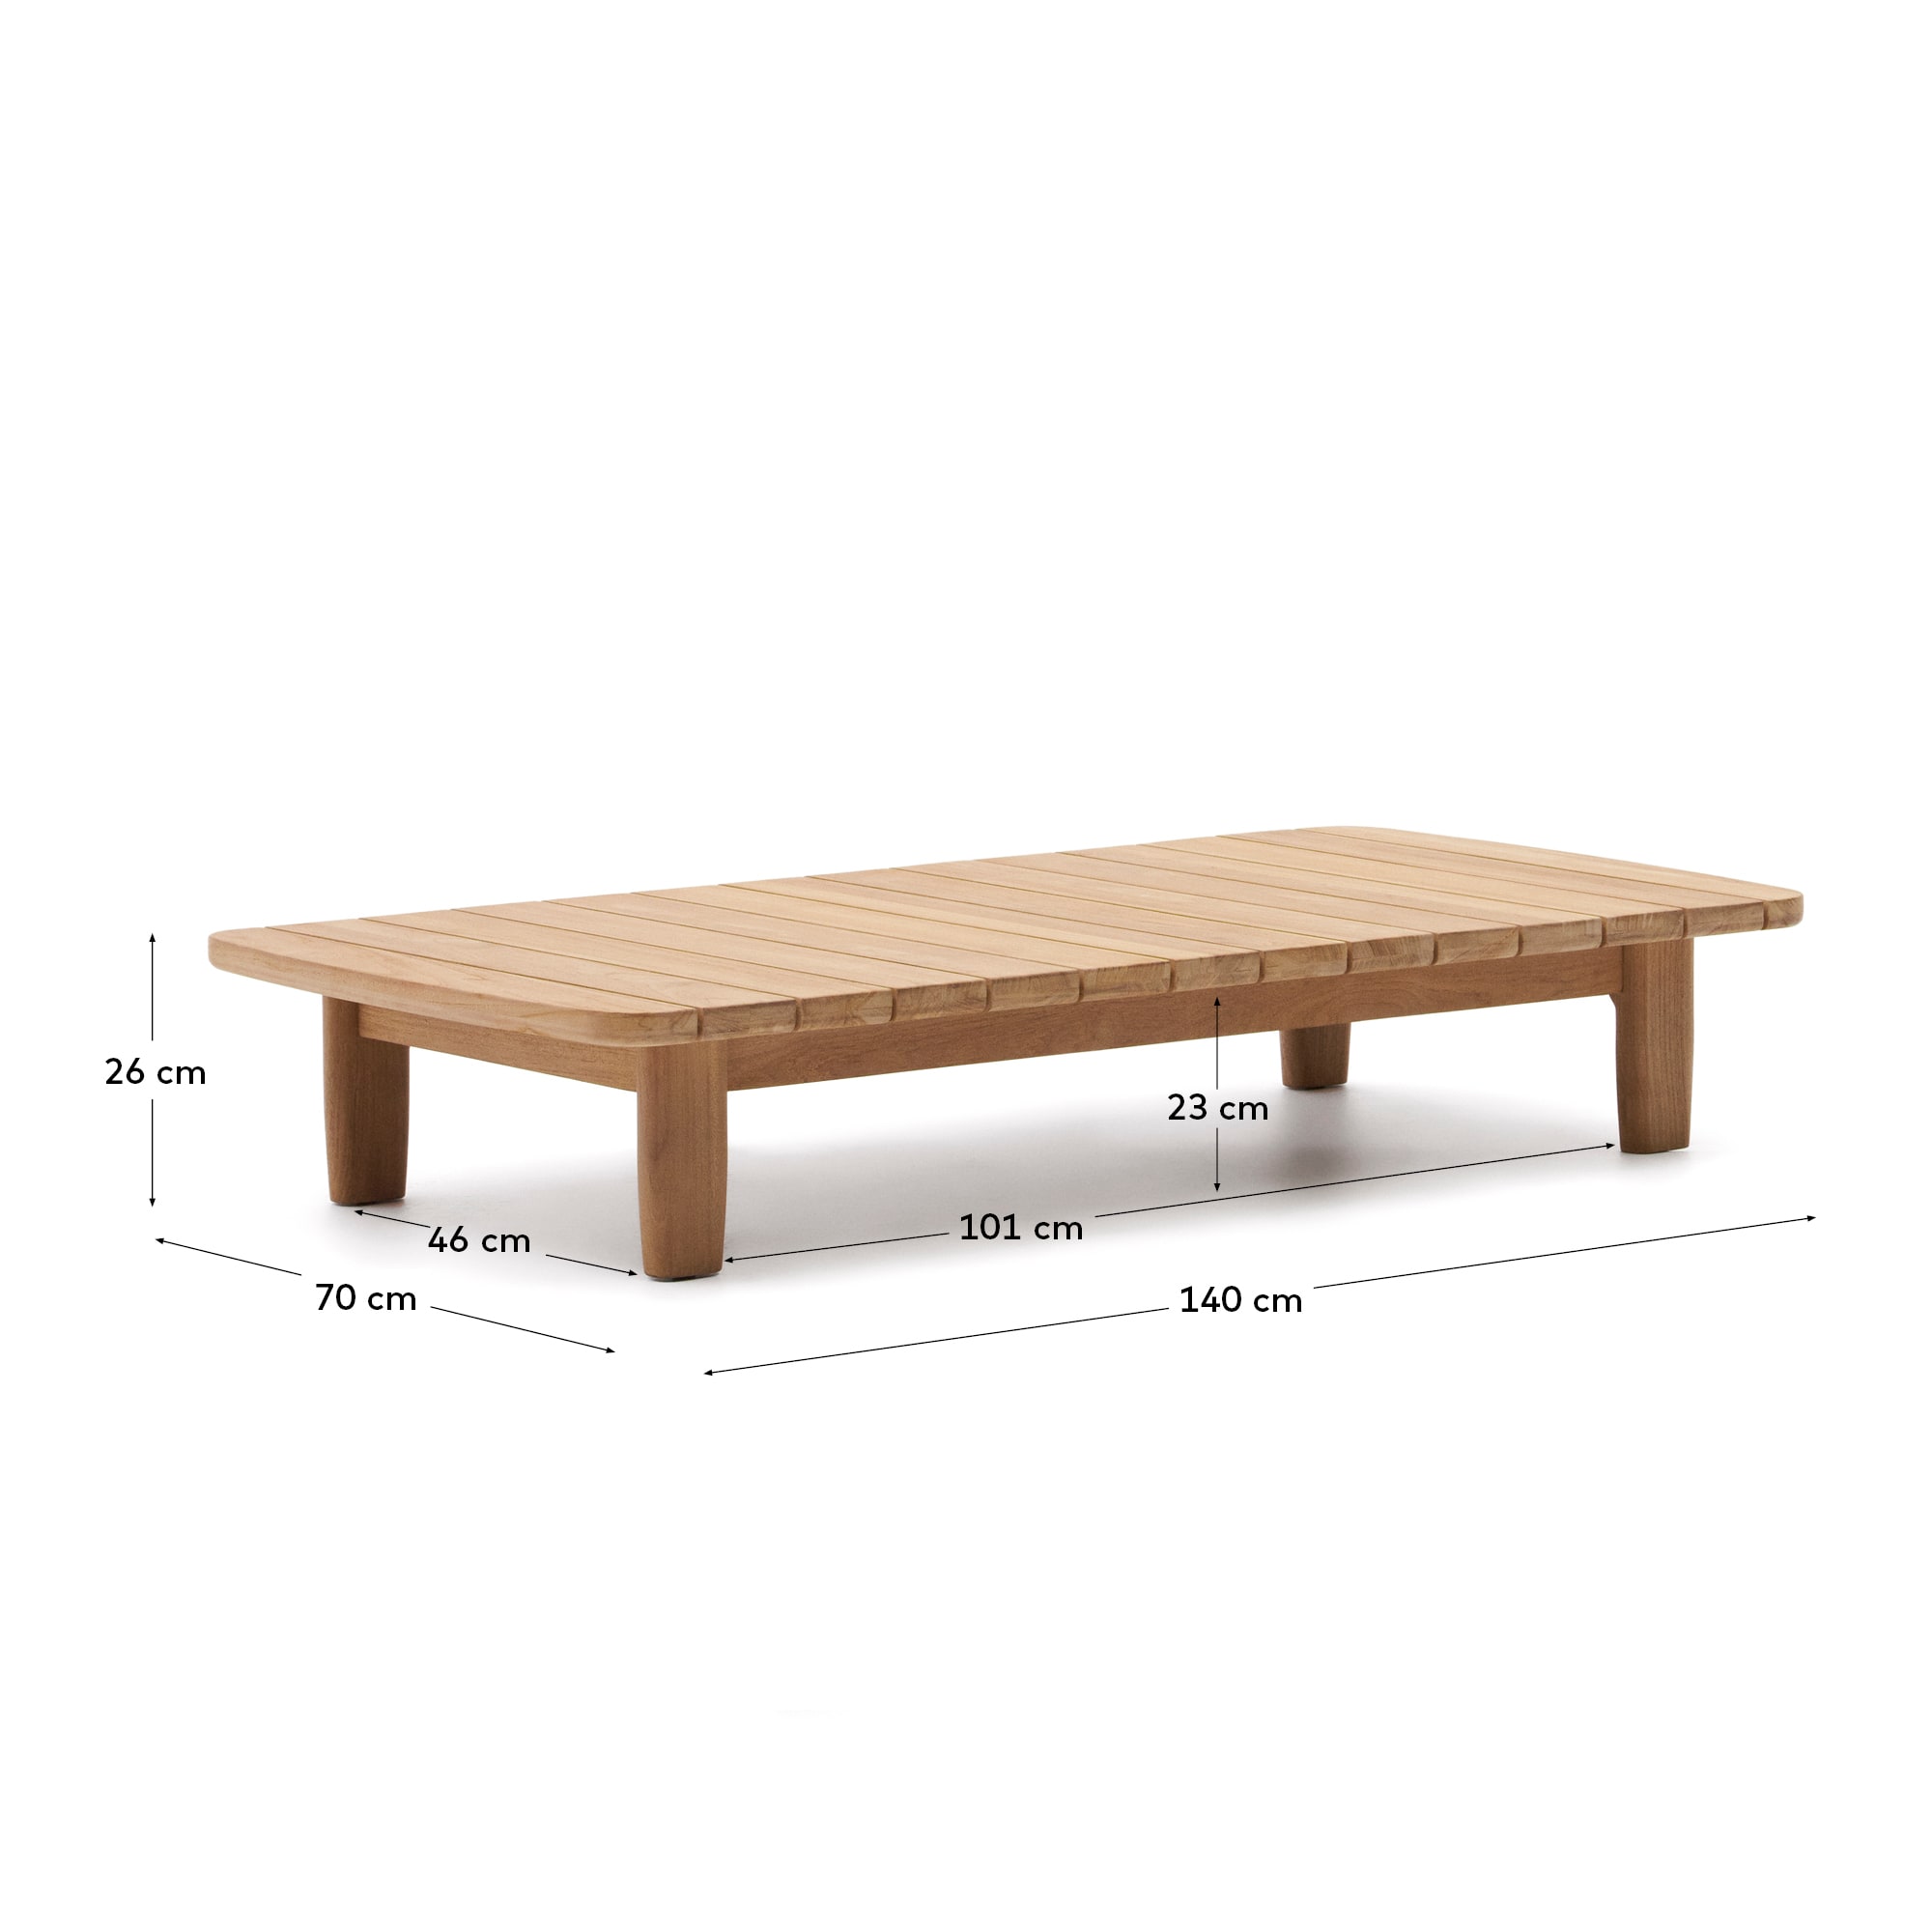 Tirant coffee table made from solid teak wood 100% FSC - sizes